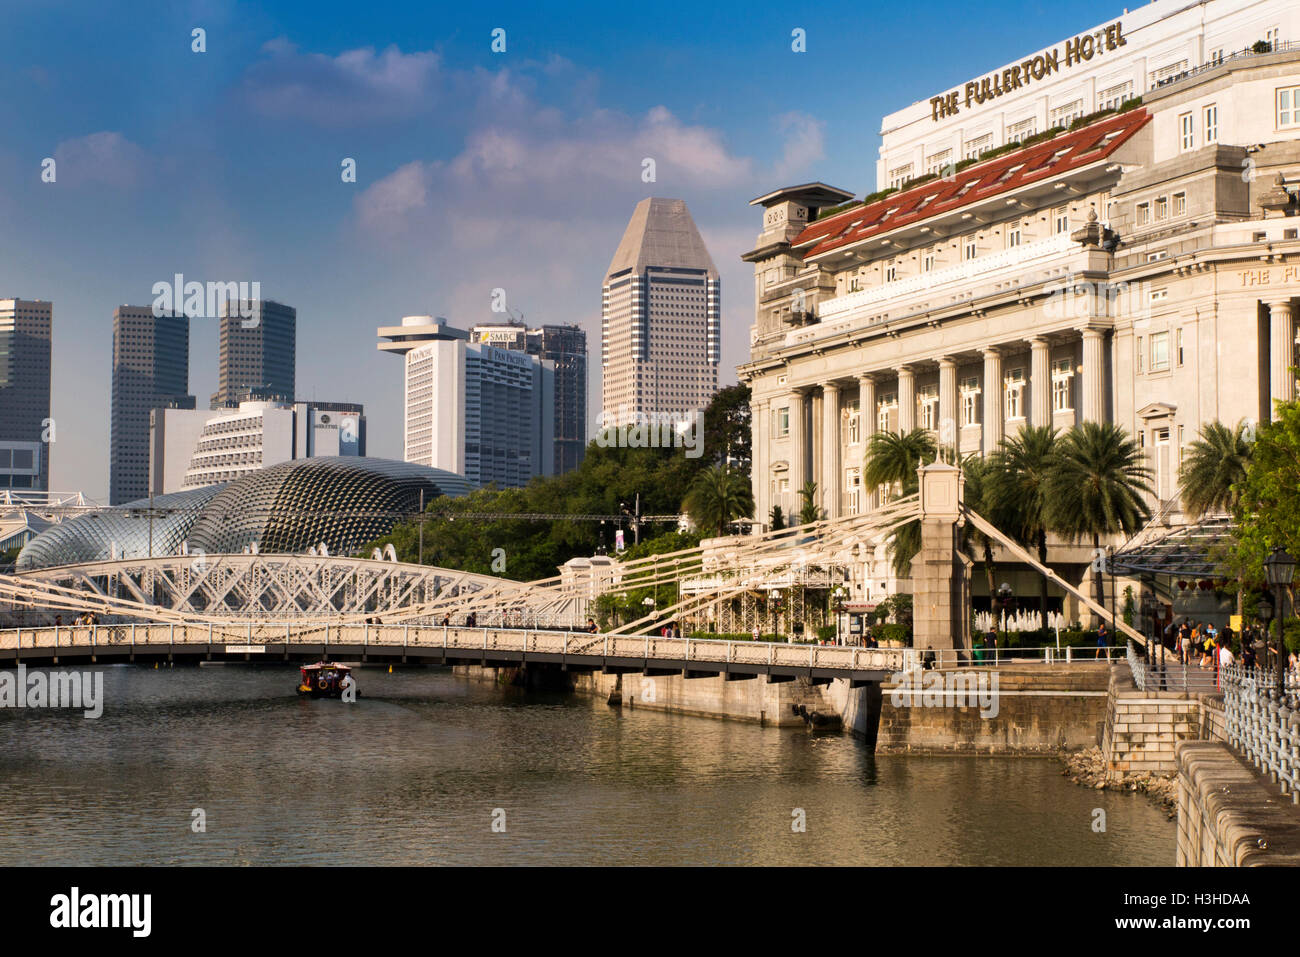 Singapore, Boat Quay, afternoon sun on Fullerton Hotel and Cavenagh Bridge Stock Photo